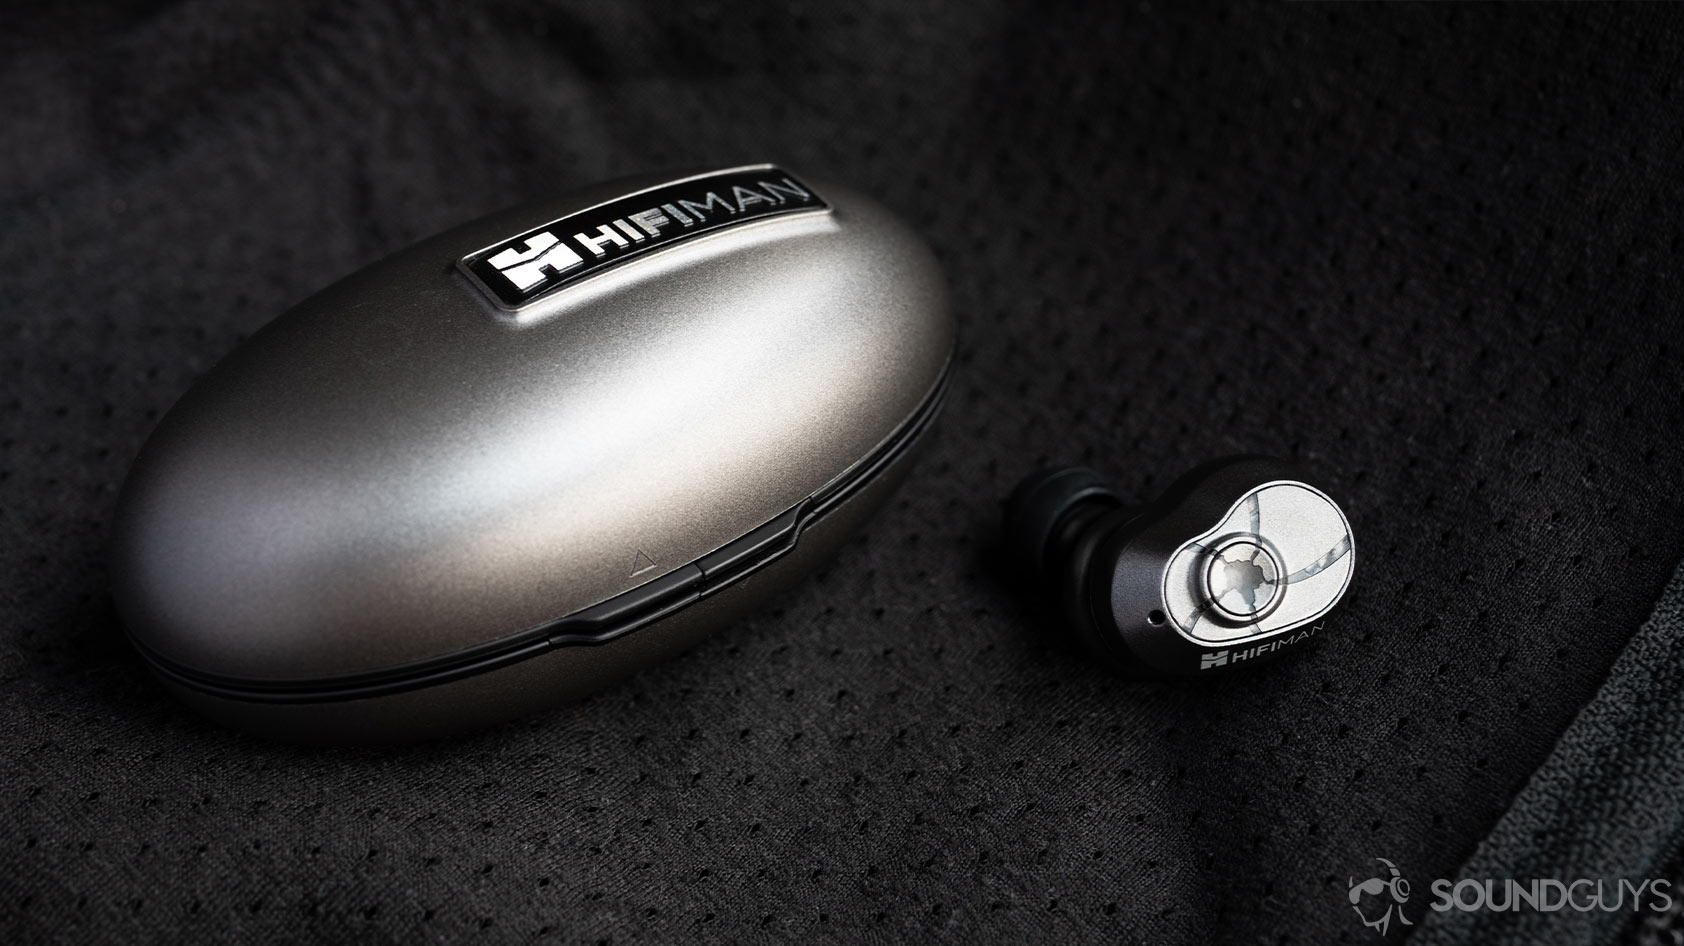 A photo of the HiFiMan TWS600 true wireless earbuds closed charging case with one earbud out of the case.